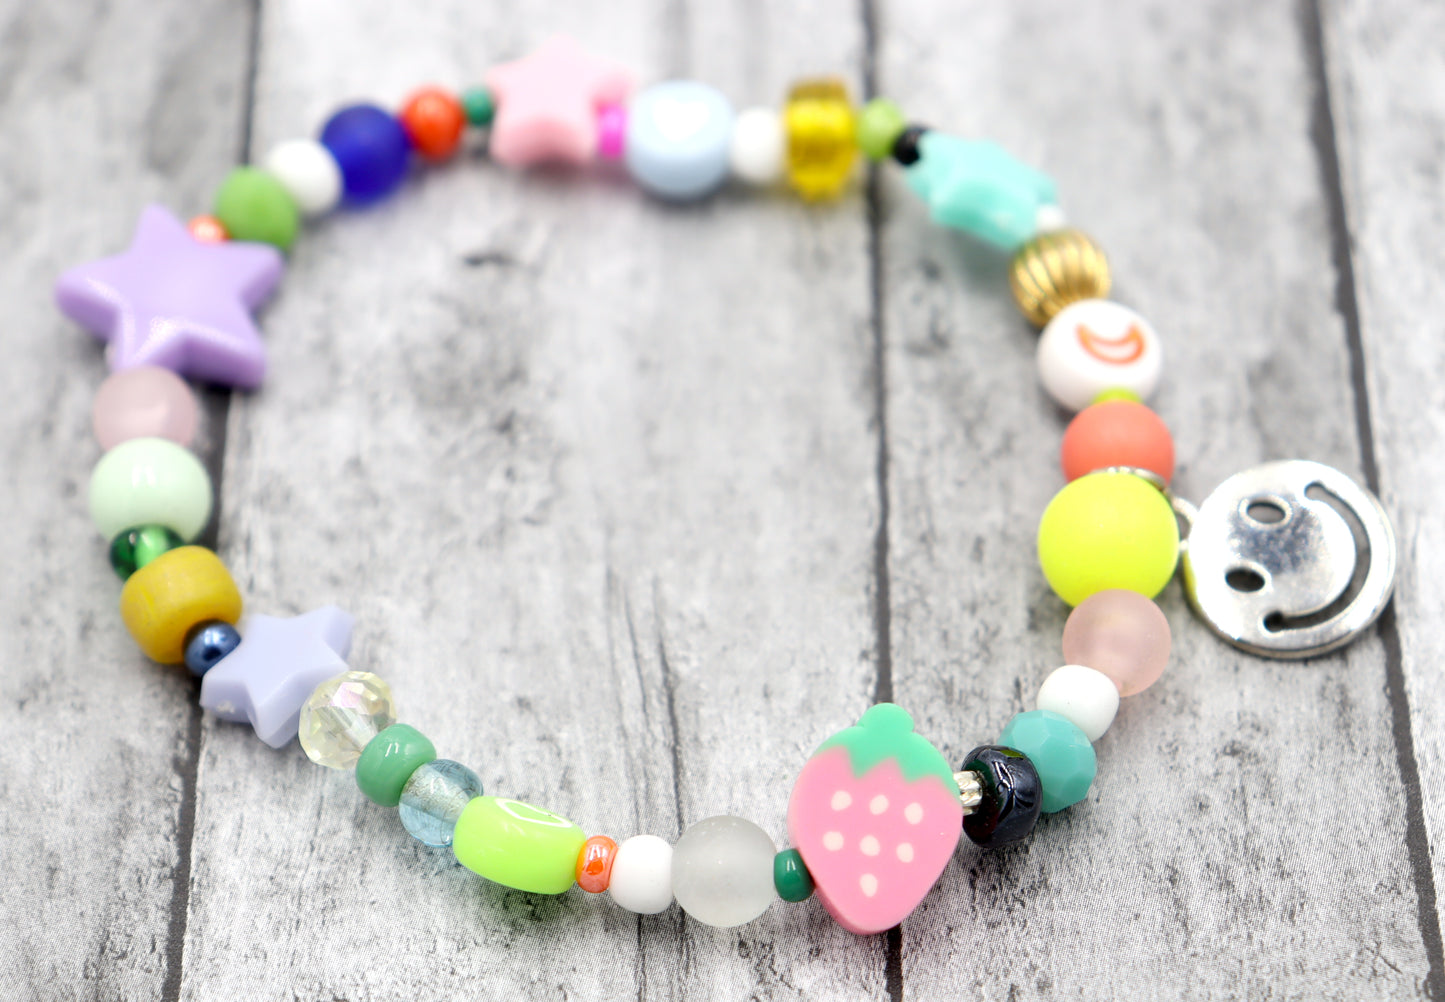 Kawaii All Things Bright and Cute All But the Kitchen Sink Fun Girlie Handmade Bracelet by Monkey's Mojo